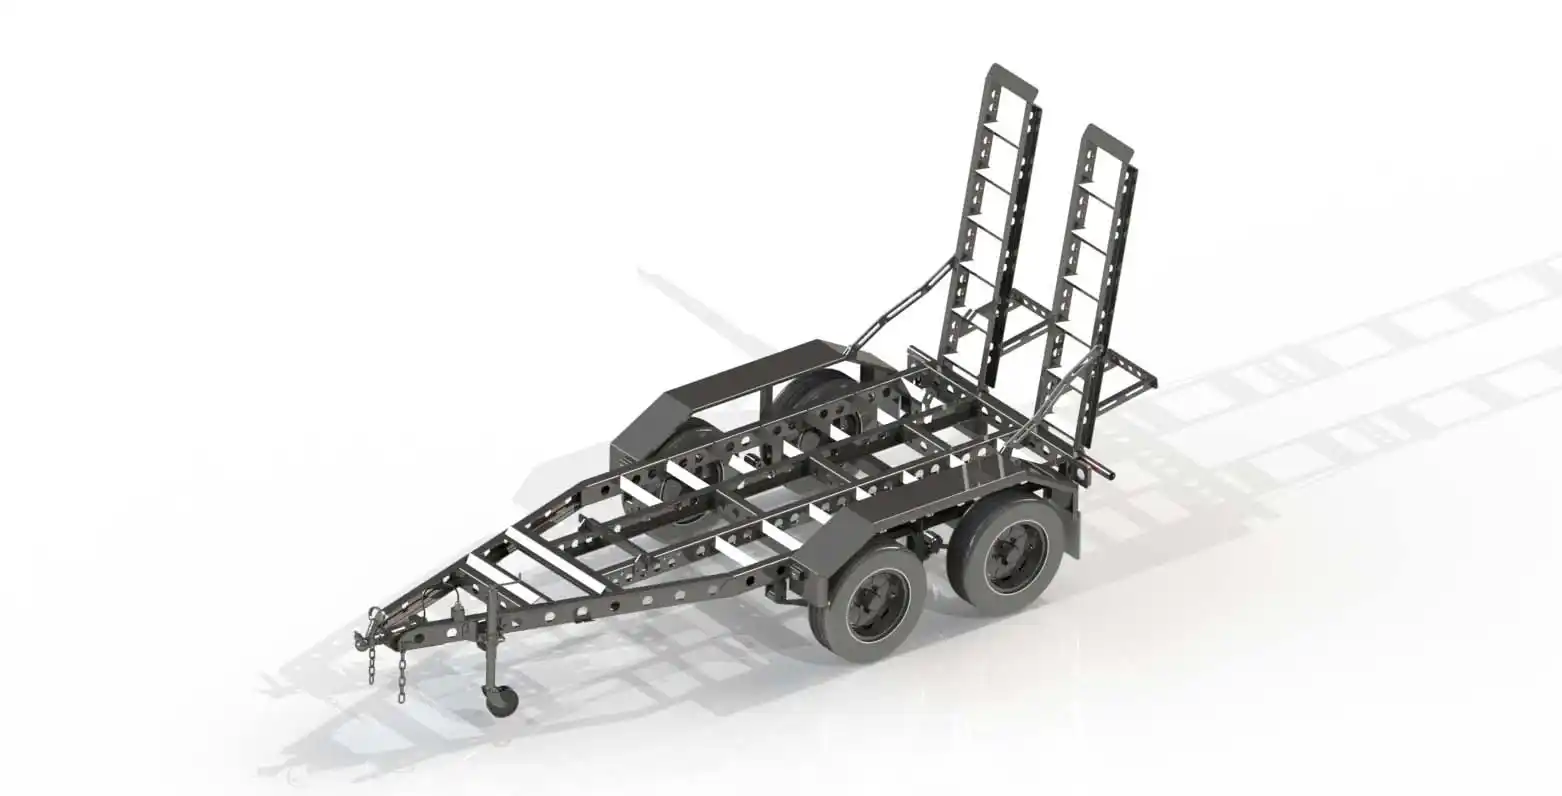 Adelaide Trailer Manufacture and Design